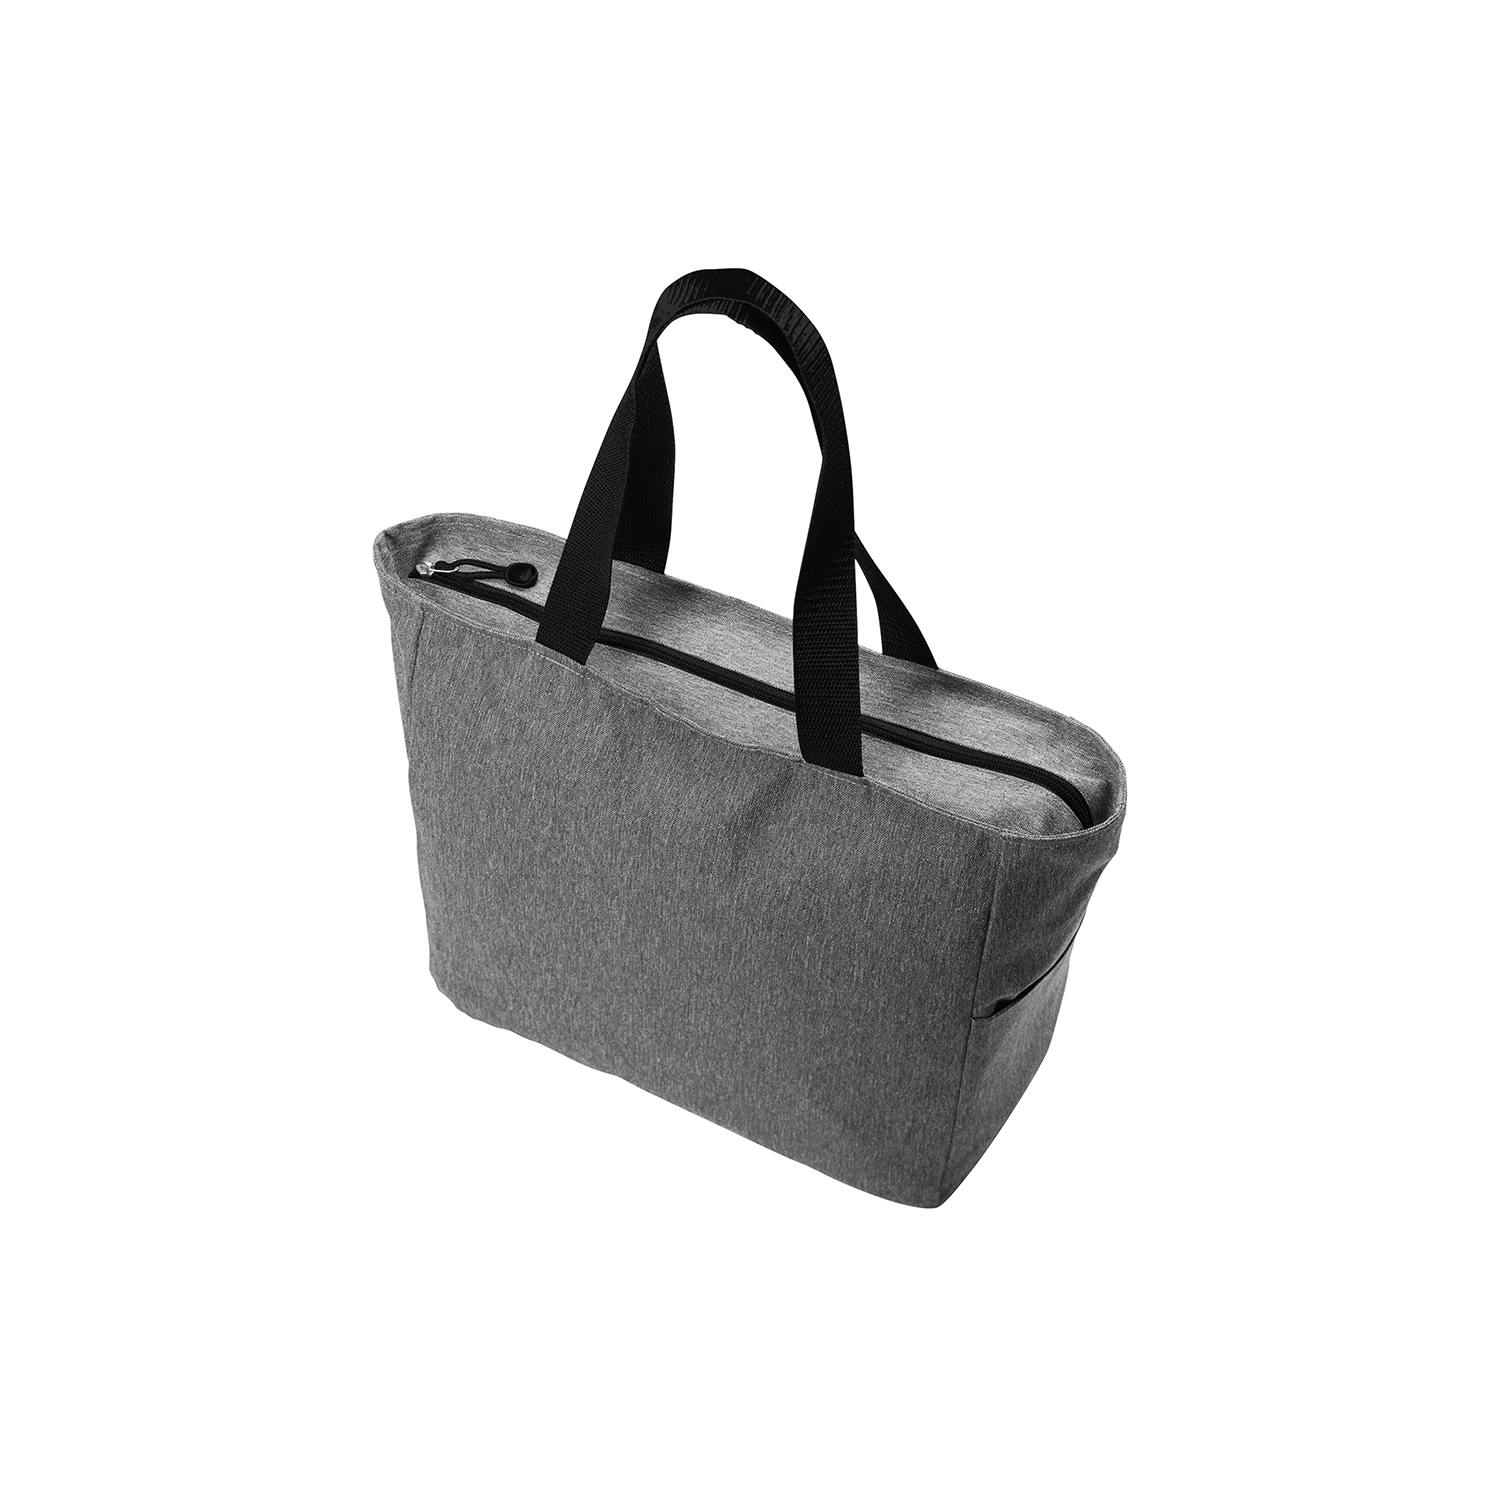 Port Authority Zip Tote Bag - additional Image 3